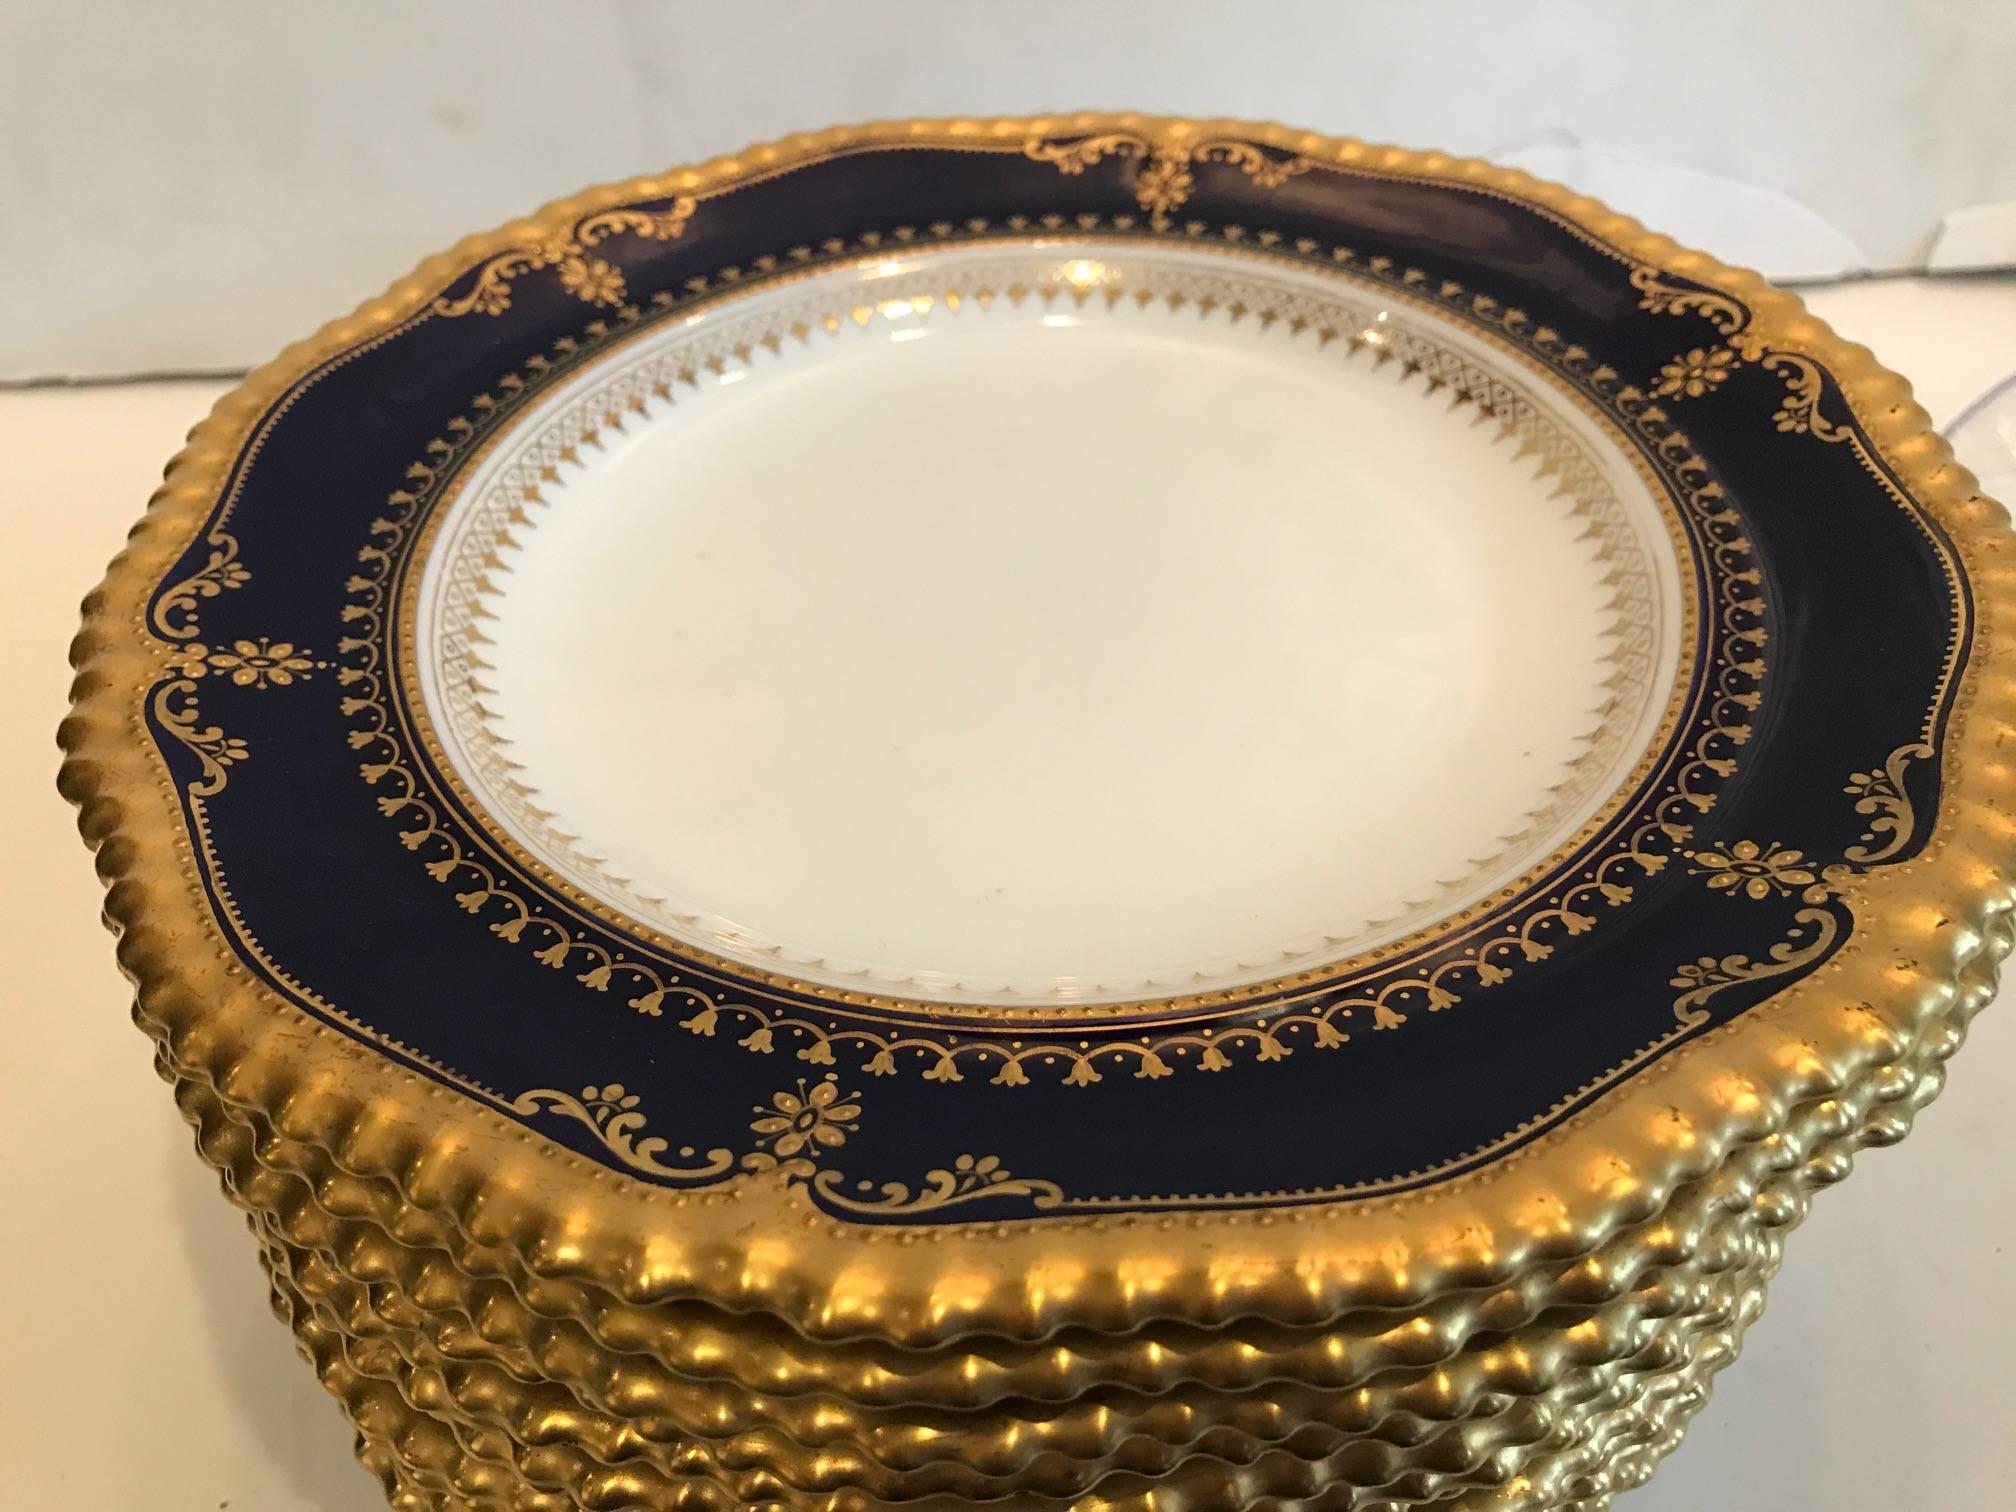 12 cobalt and gold 9 inch accent plates with hand gilding. Made in England by Cauldon, markings date these to 1910, slight gold wear to a few on the inside ring from staking, otherwise excellent condition.
Edwardian elegance.